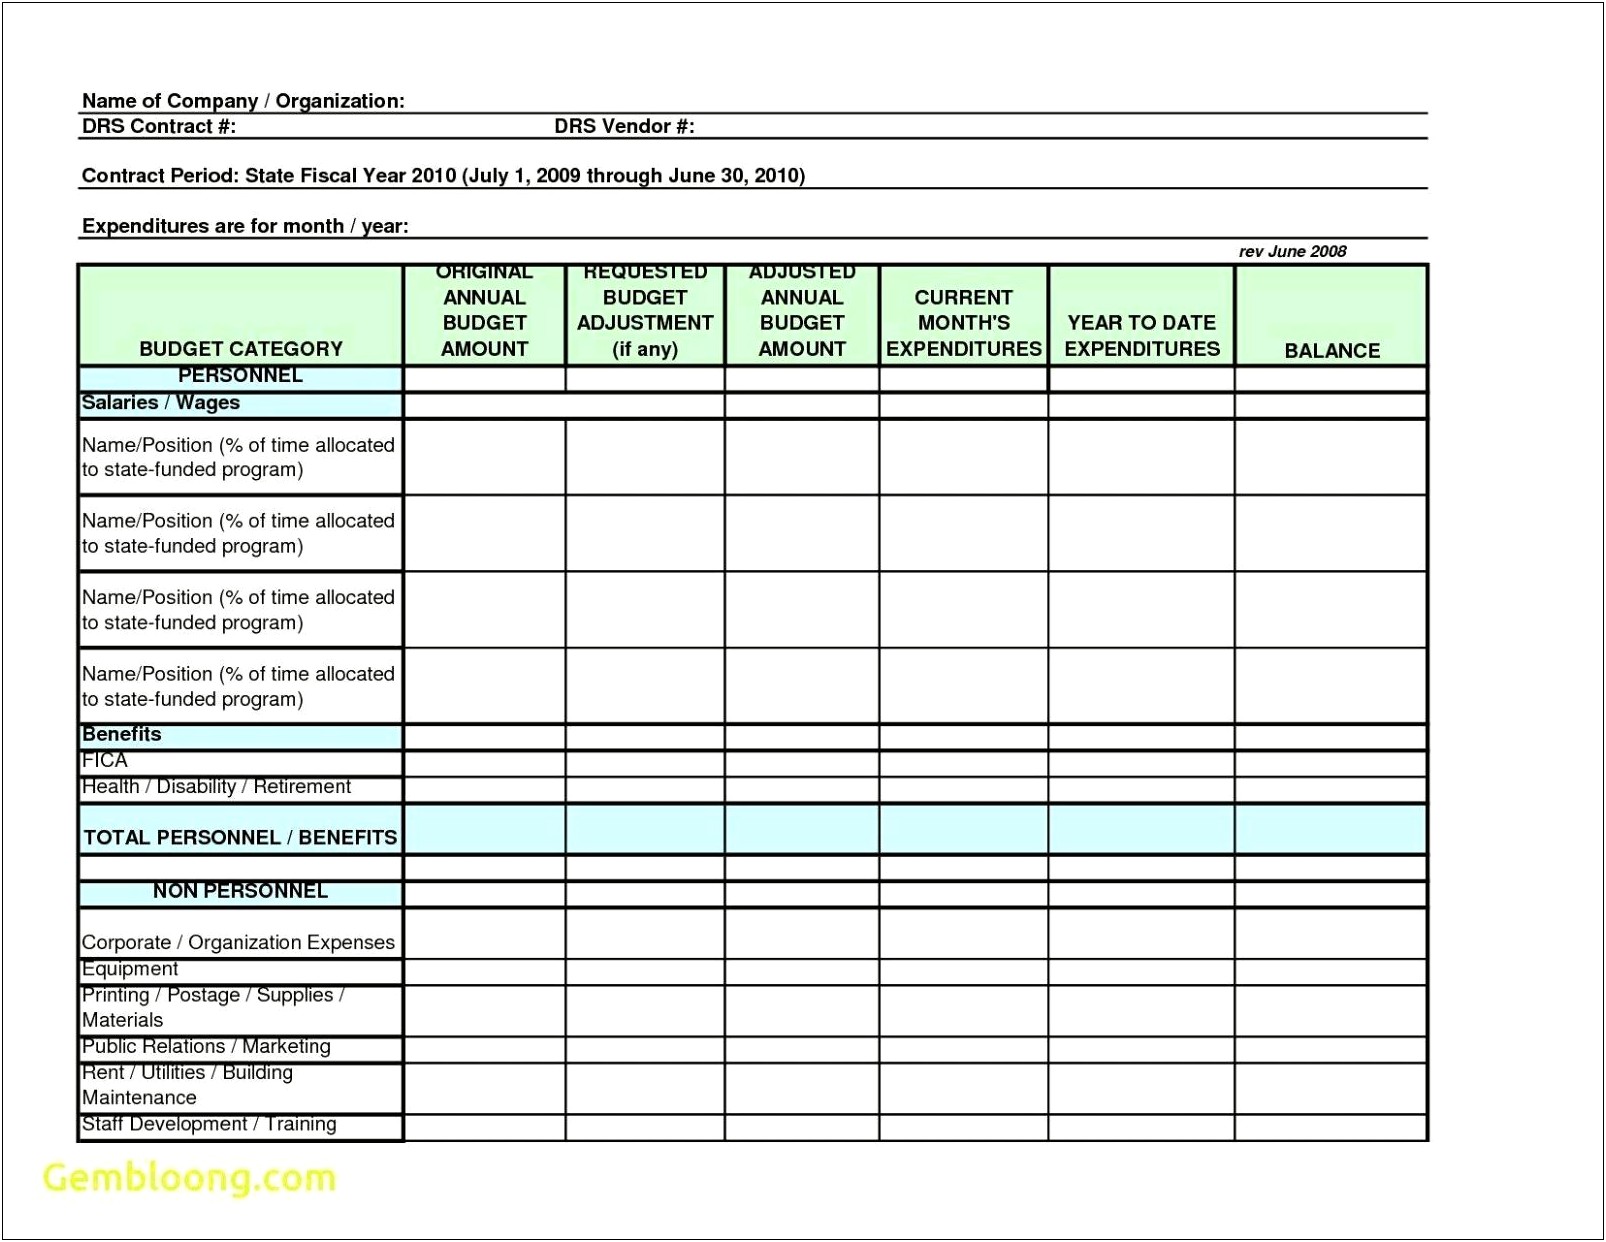 Employee Training Schedule Template Excel Free